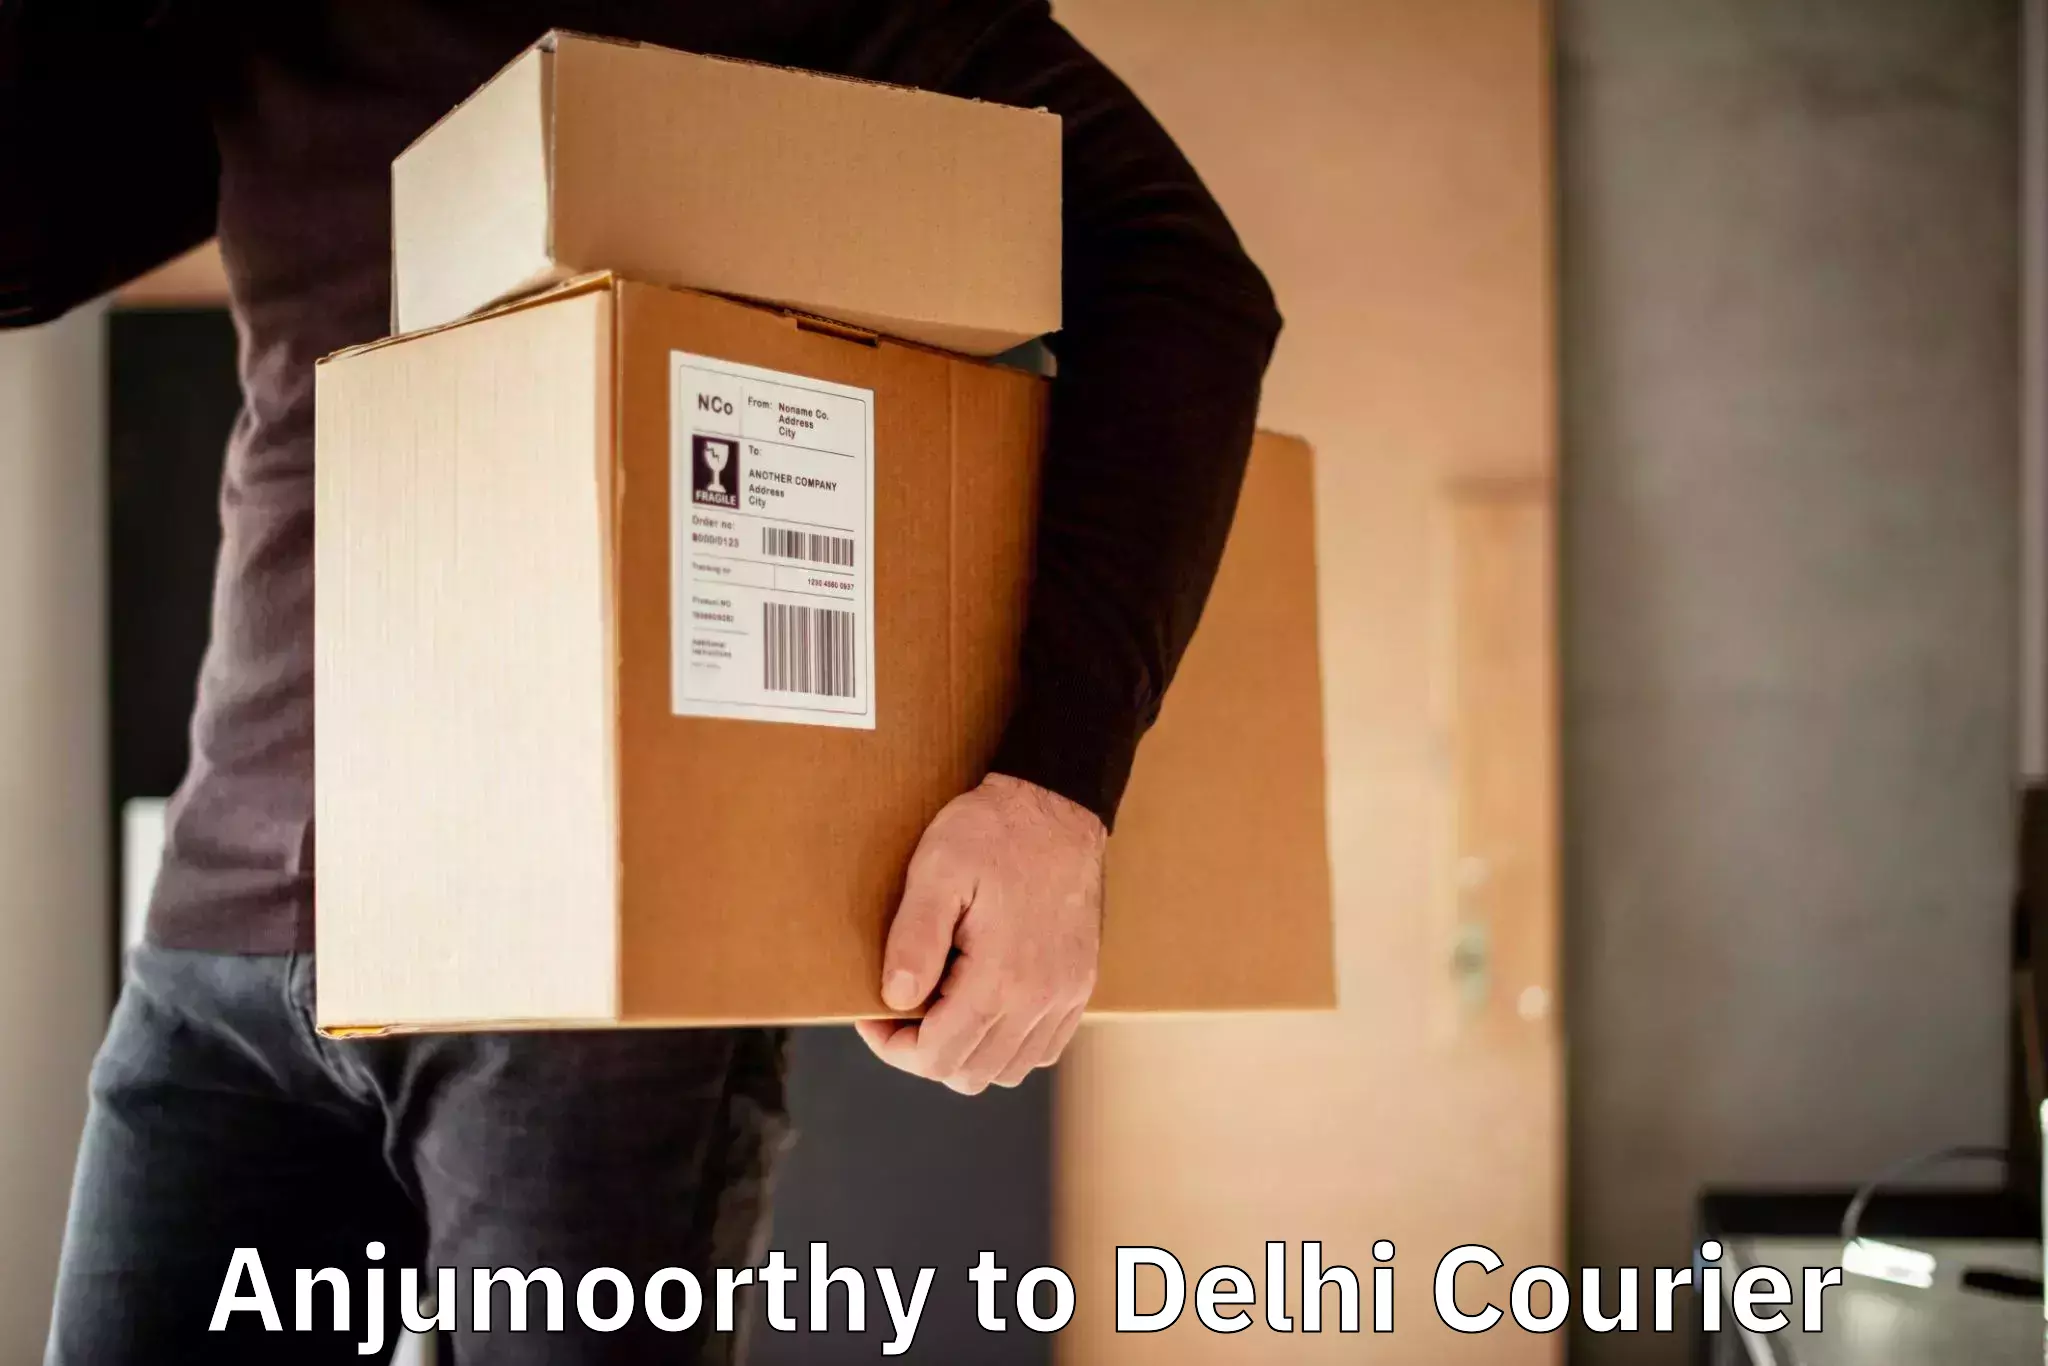 Supply chain delivery Anjumoorthy to NCR